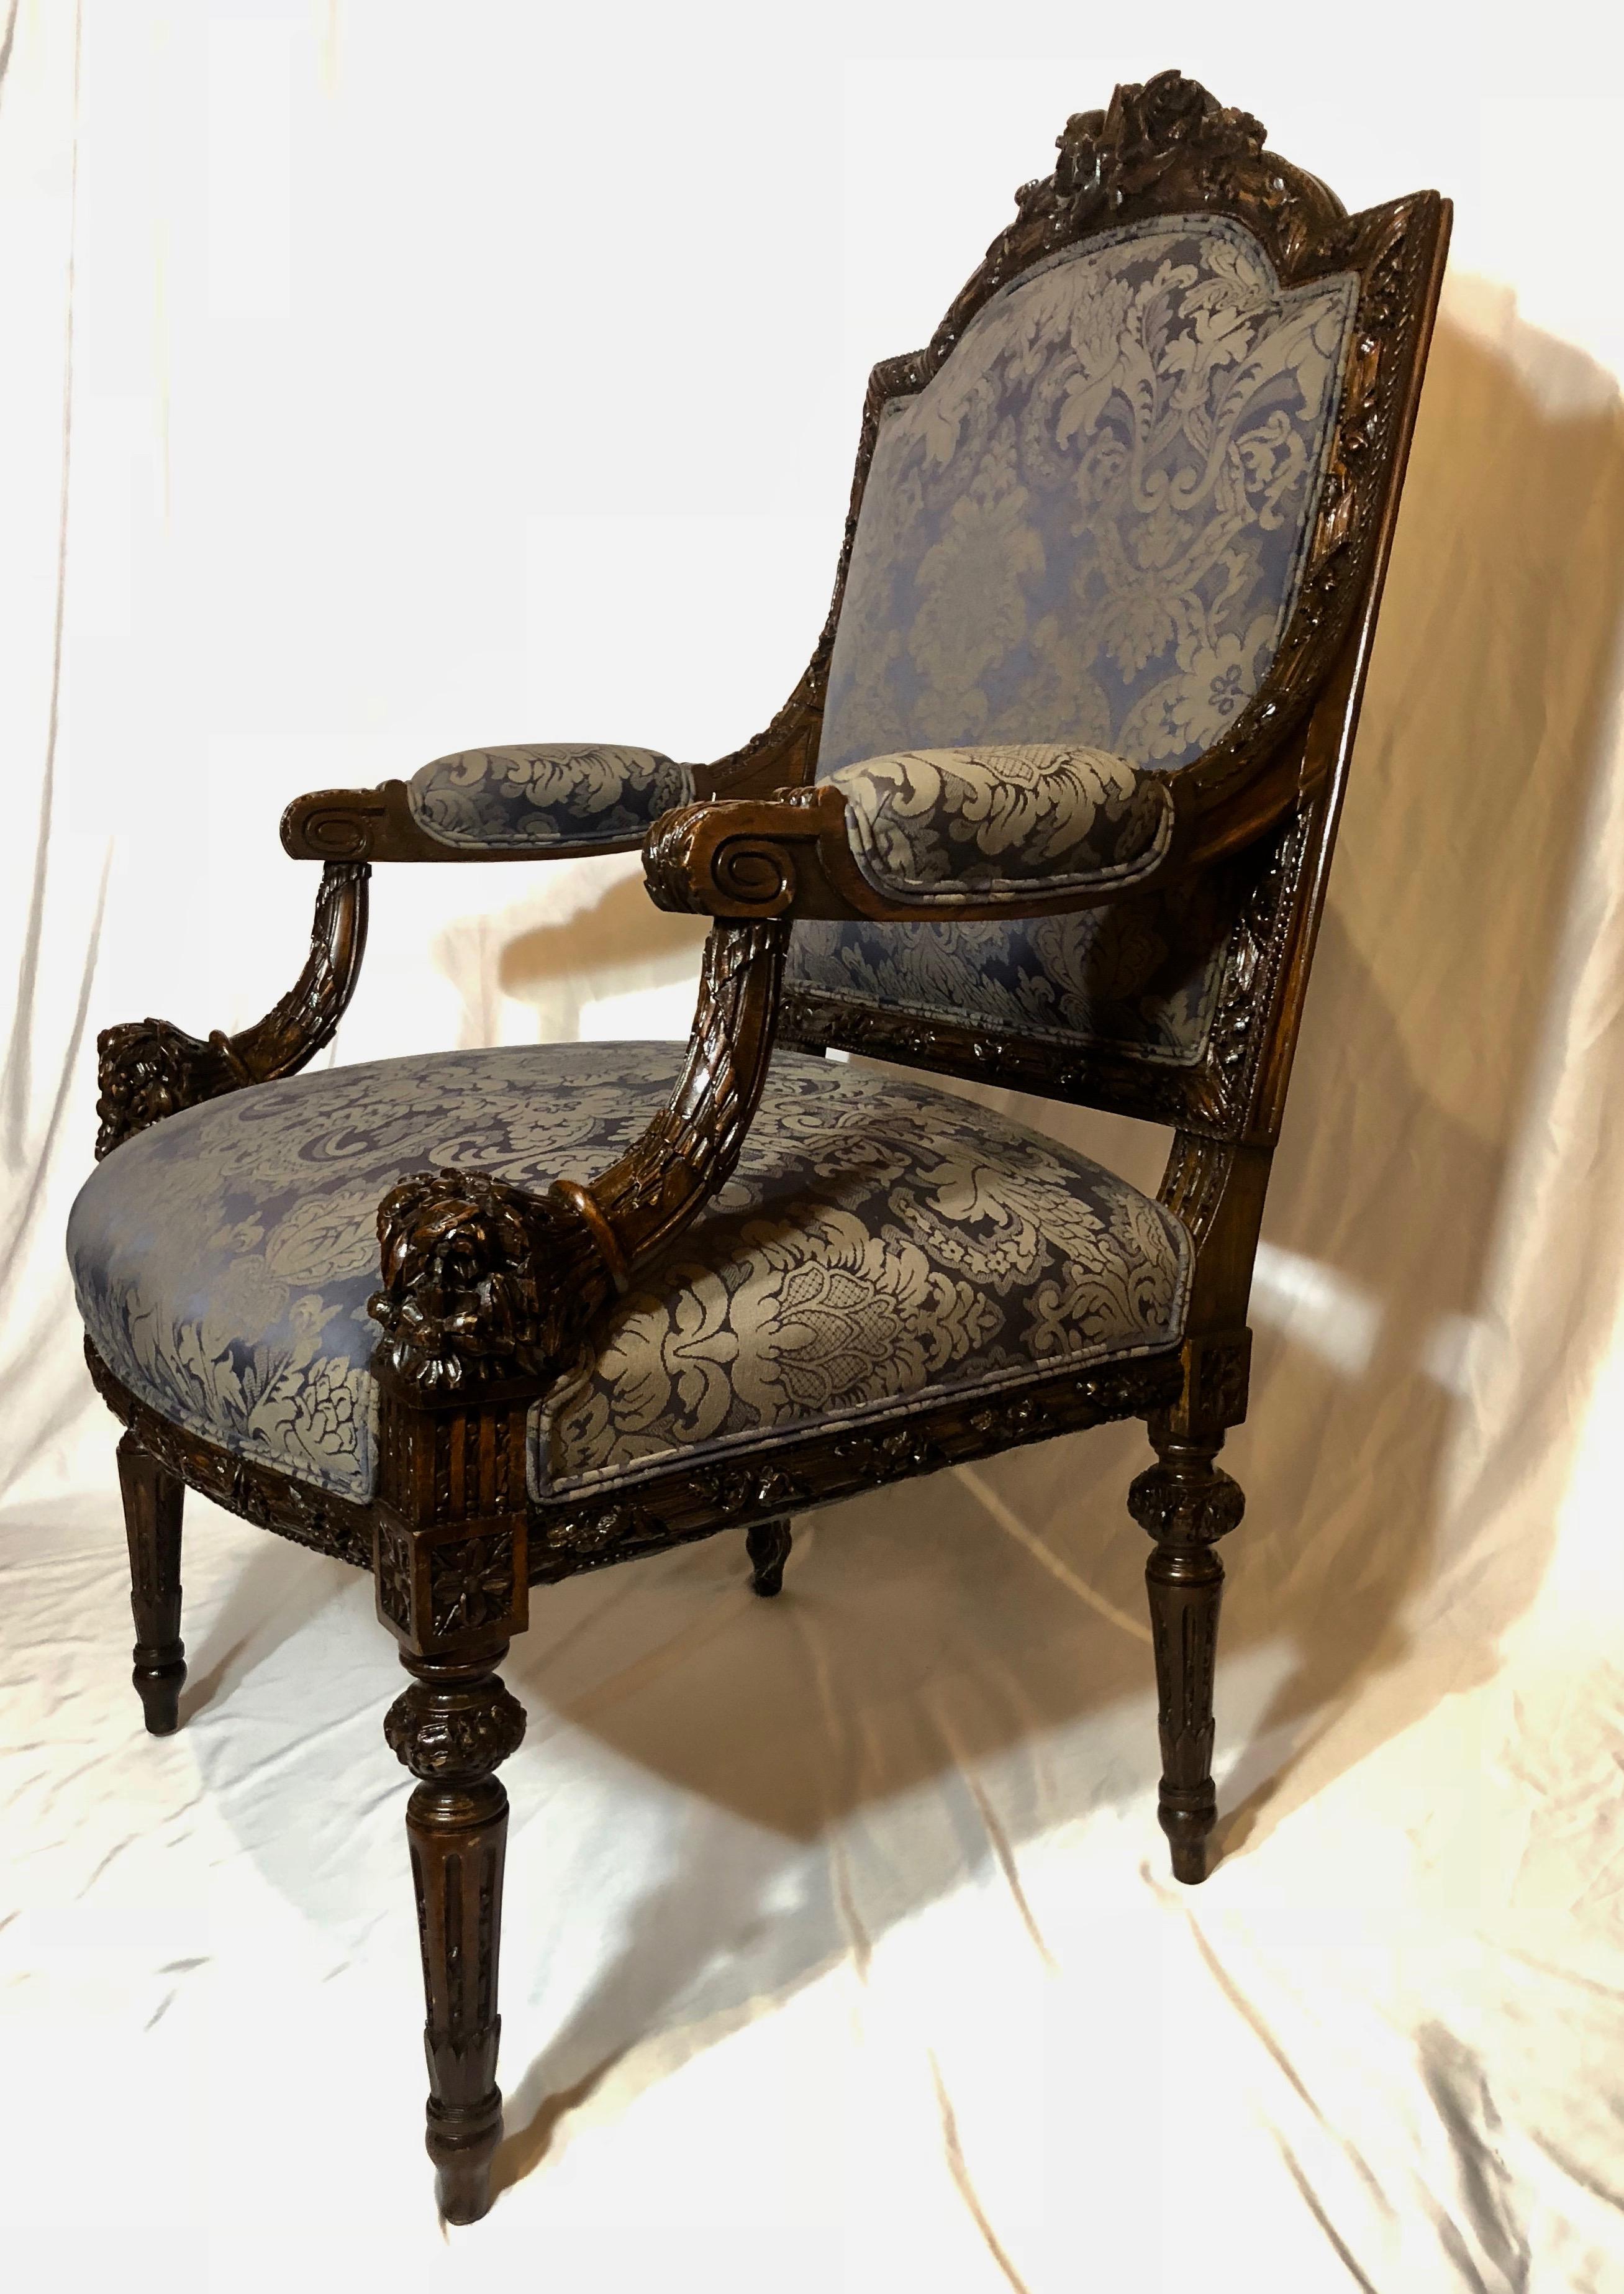 This armchair has very well-defined carving, as well as nice upholstery. 